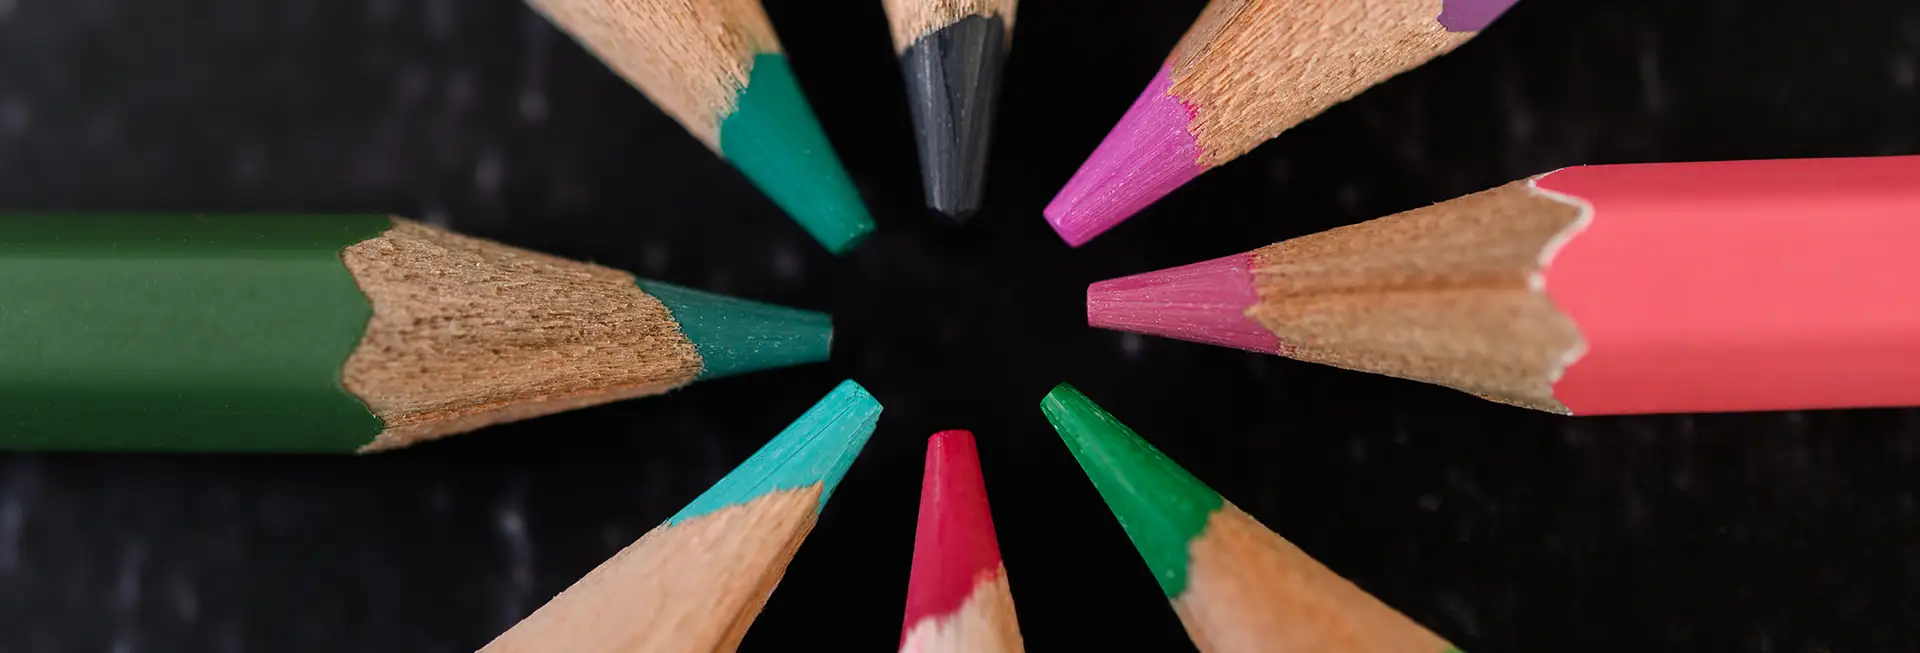 Different colored pencils in a circle.